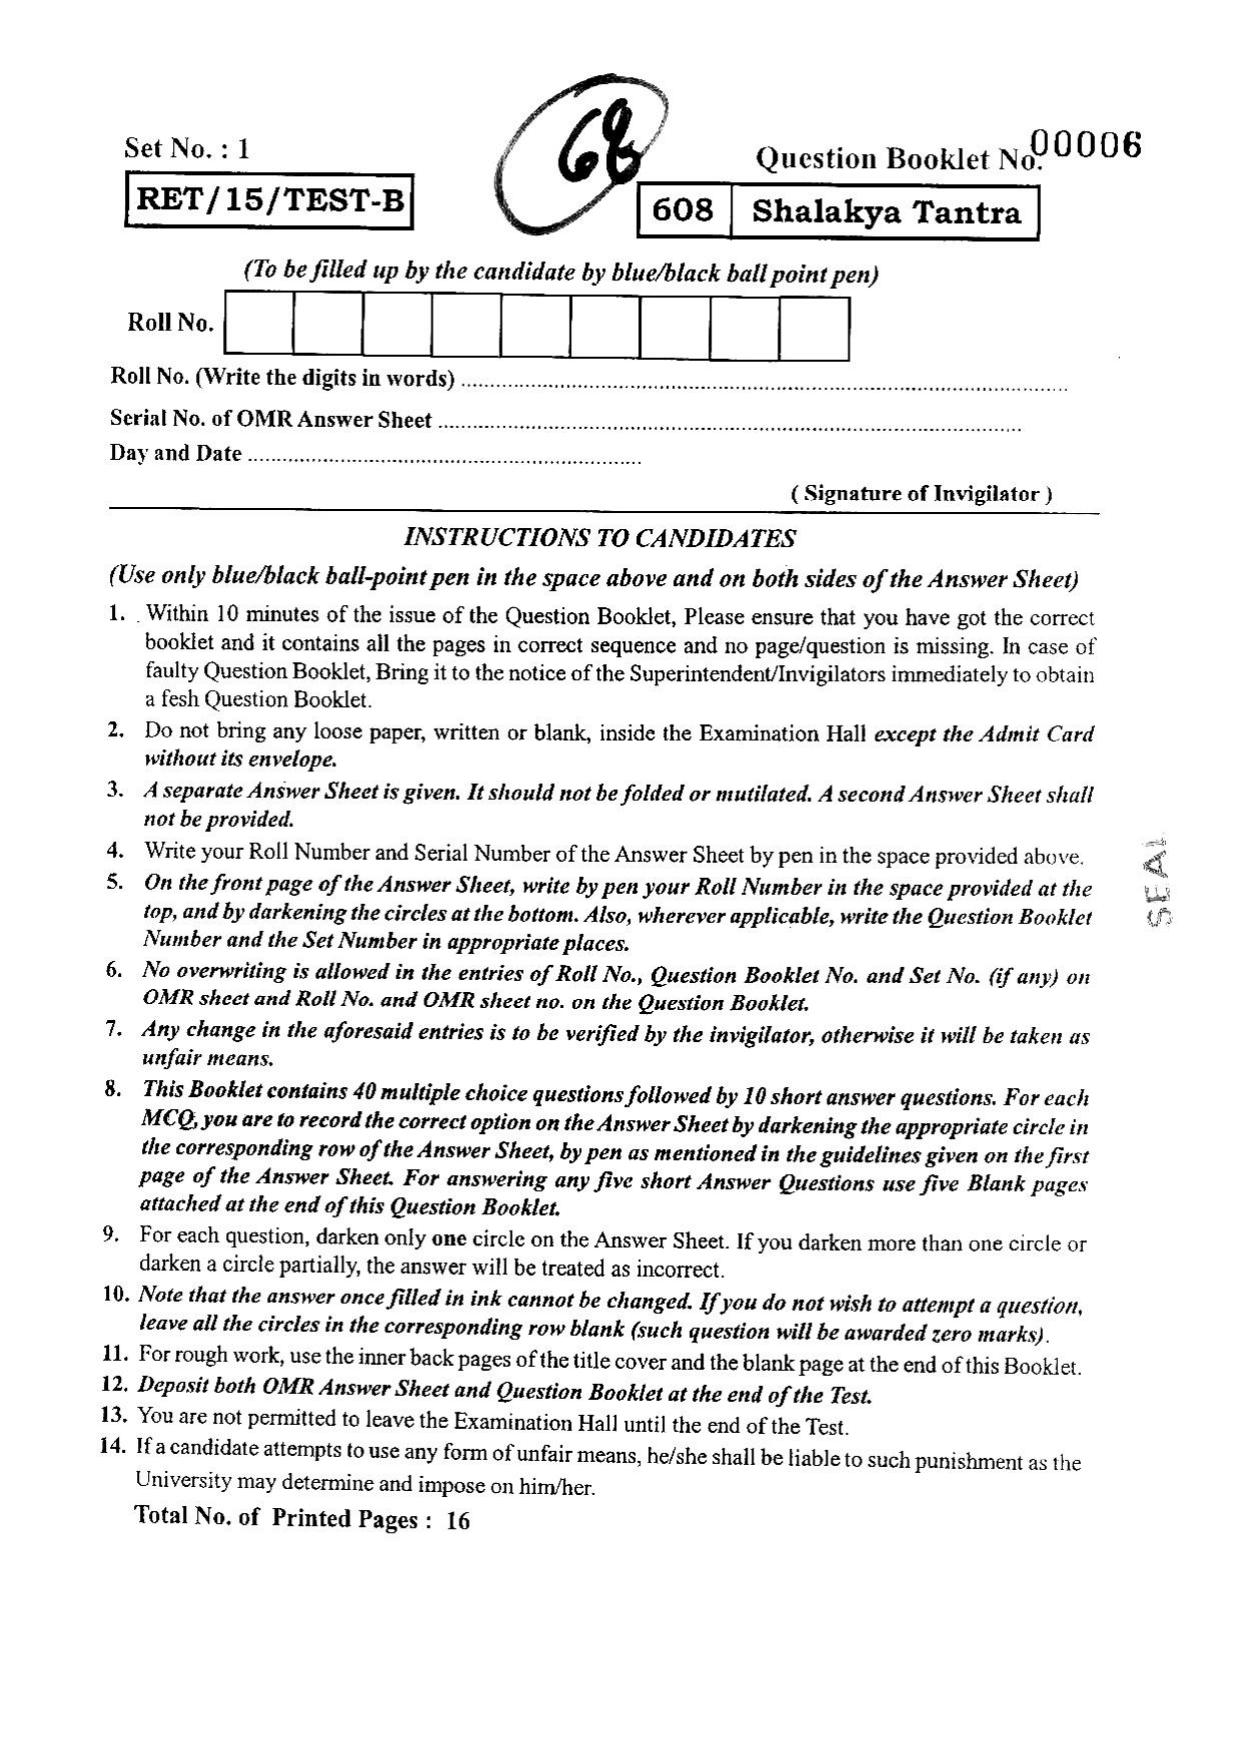 BHU RET SHALAKYA TANTRA 2015 Question Paper - Page 1